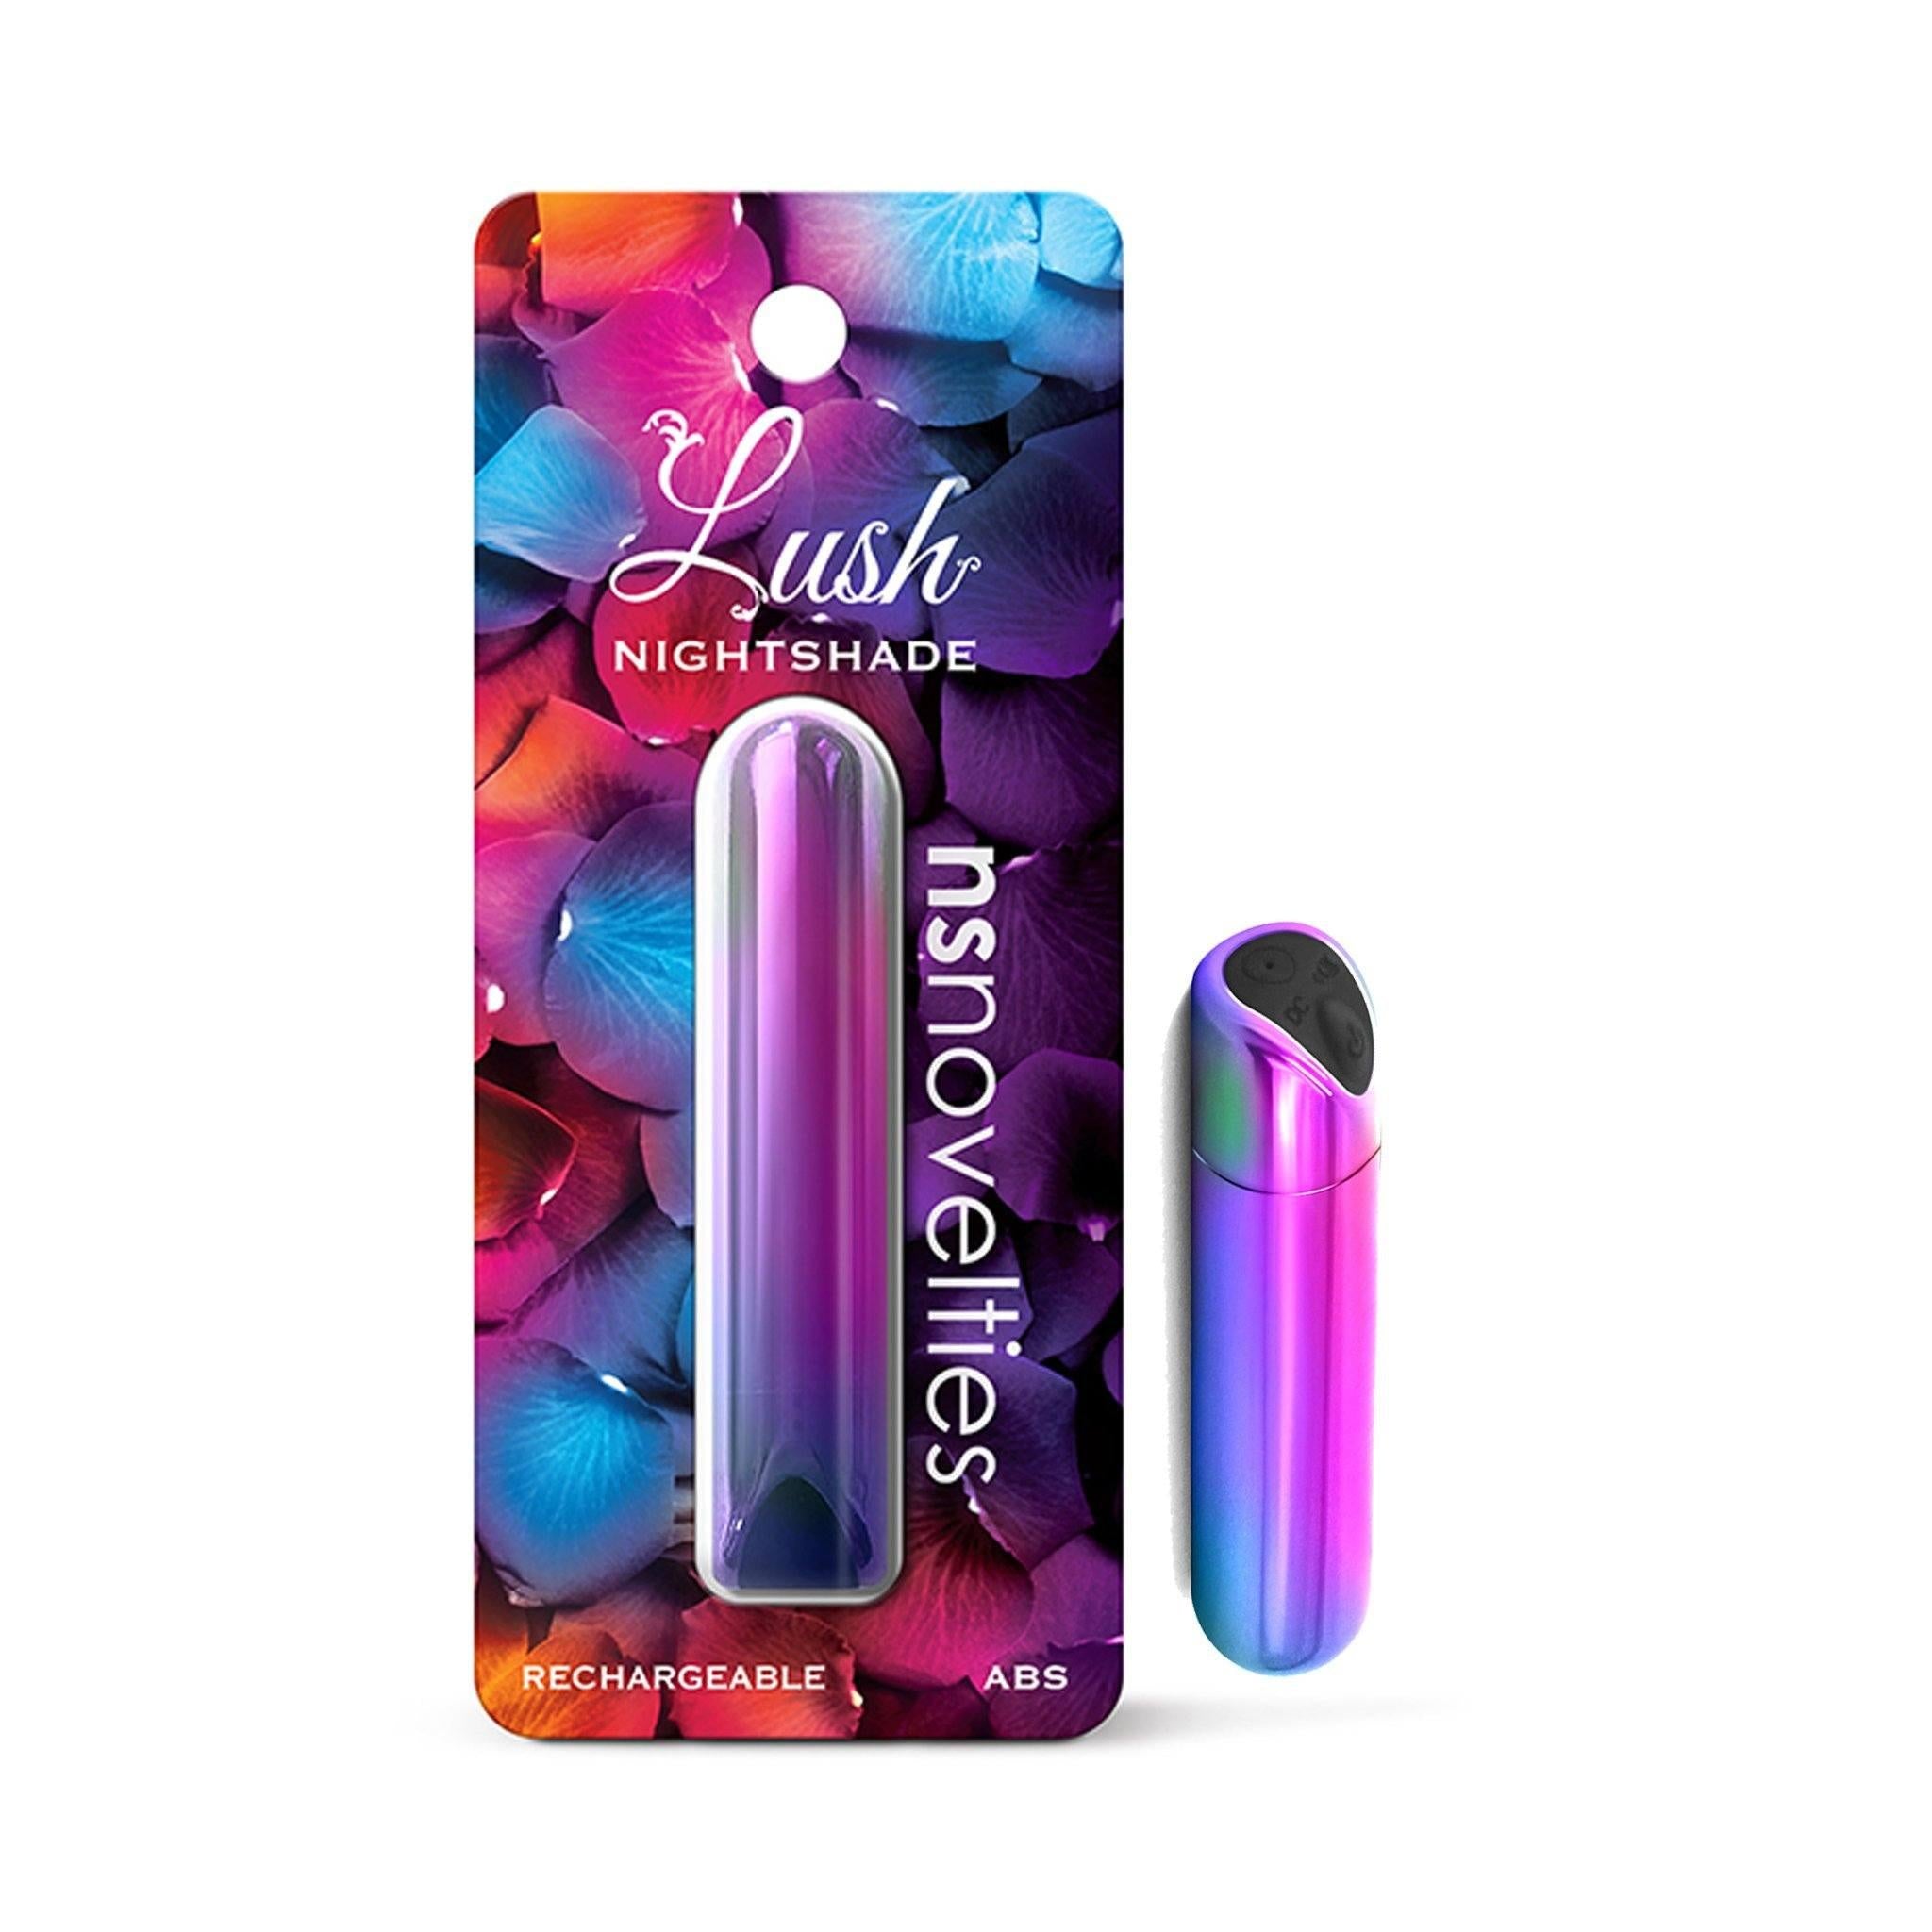 Lush Nightshade Petite Rechargeable 10 Function Vibrator - CheapLubes.com